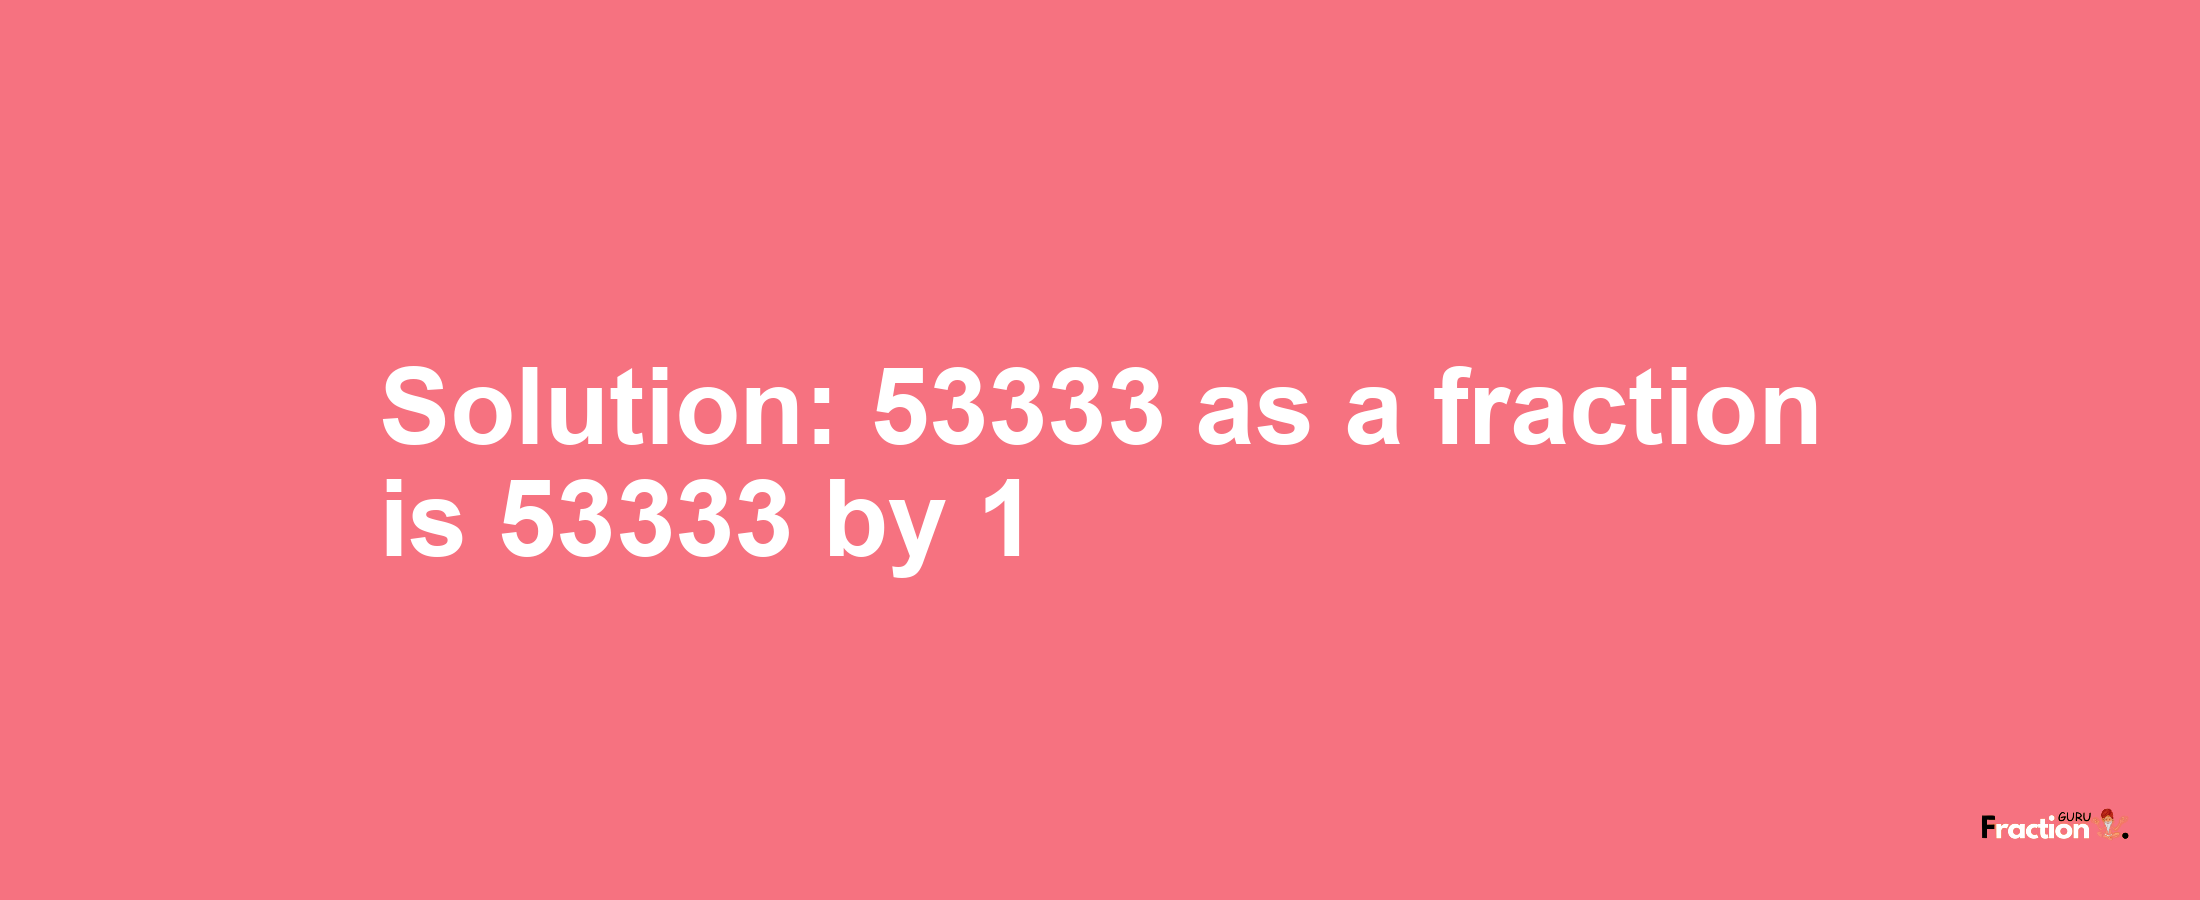 Solution:53333 as a fraction is 53333/1